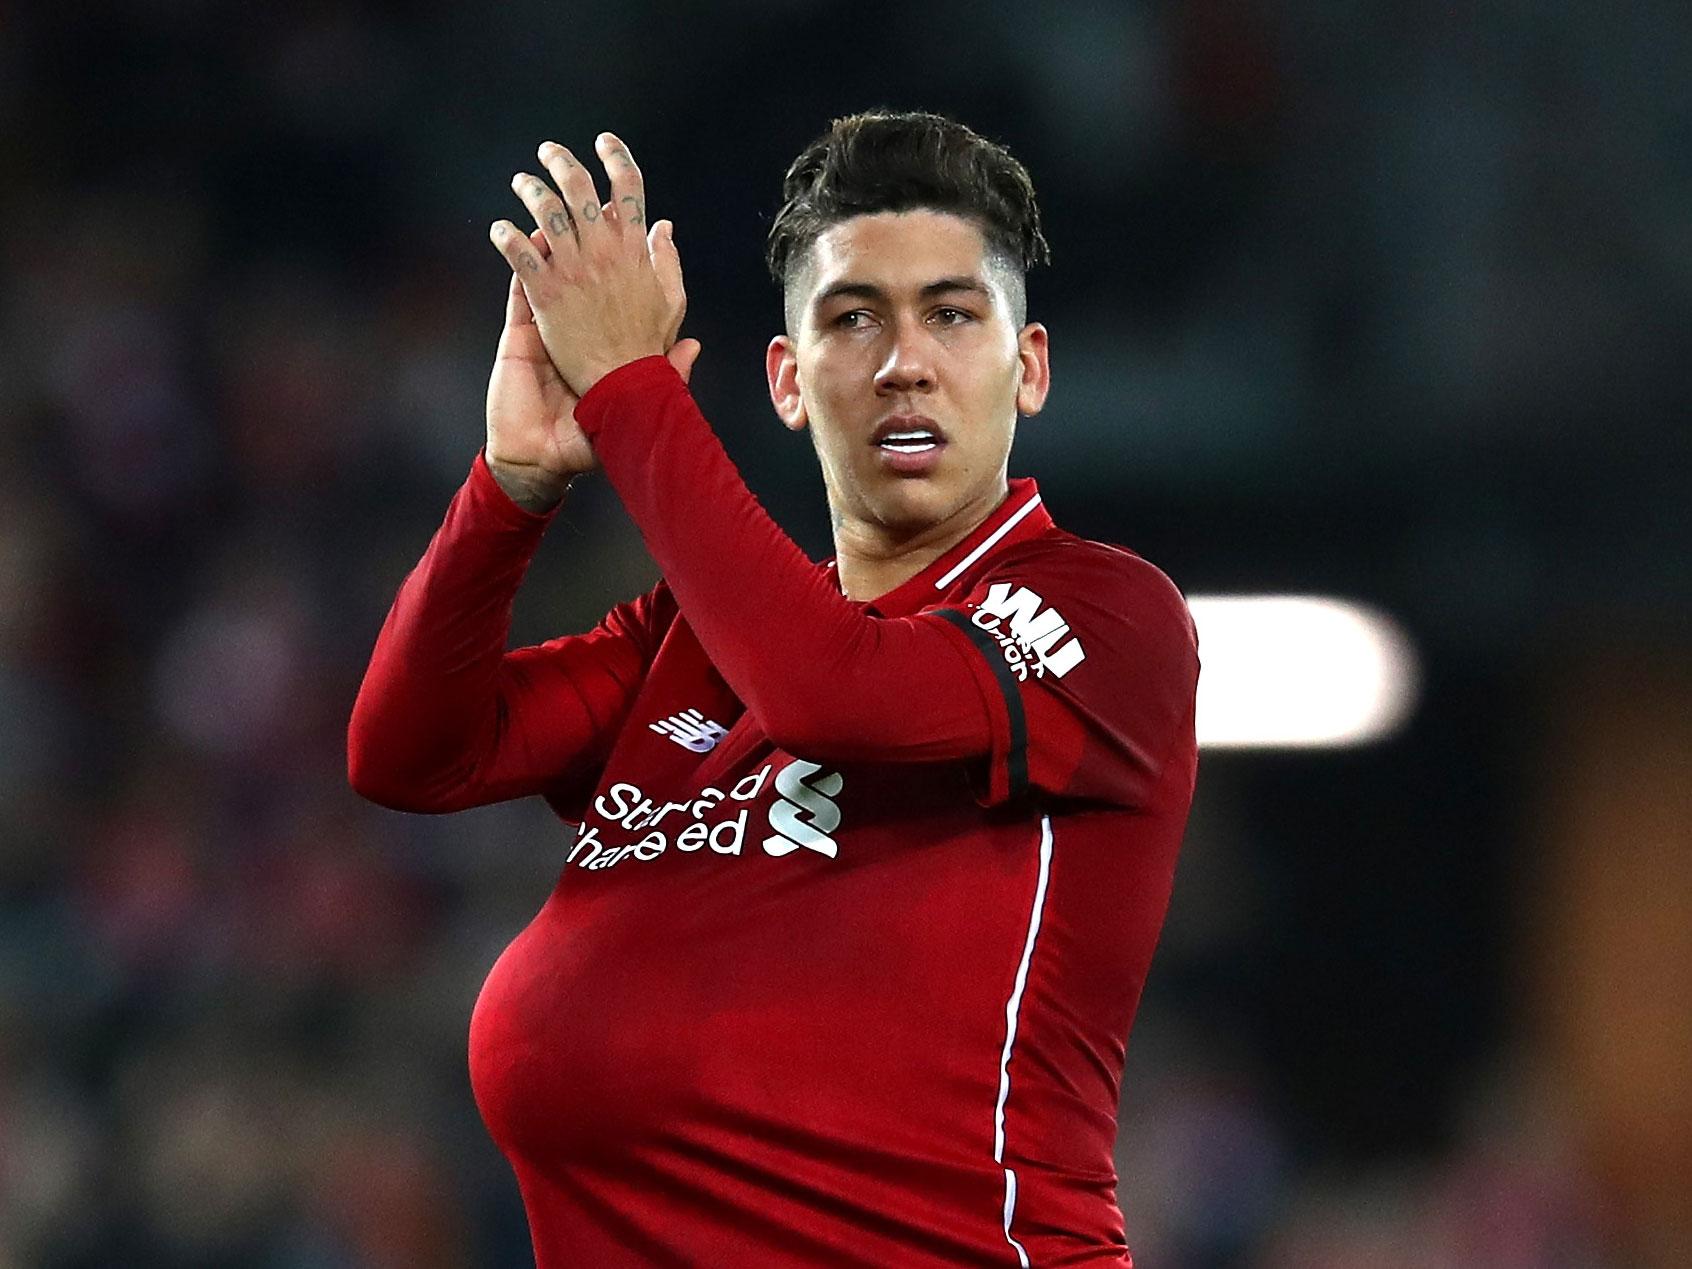 Firmino scored a hat-trick against Arsenal